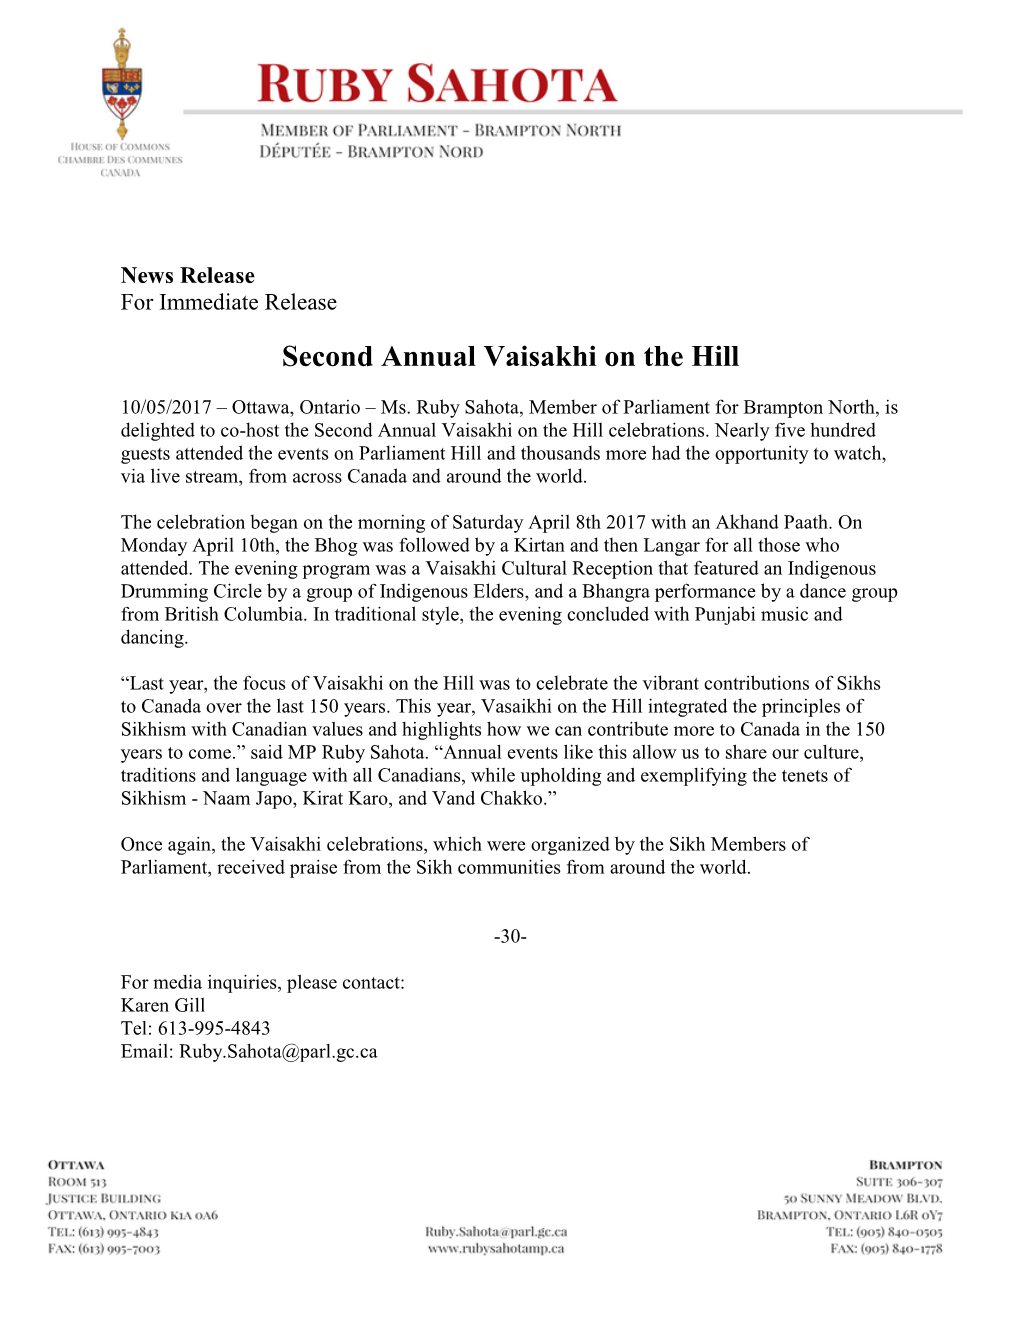 Second Annual Vaisakhi on the Hill